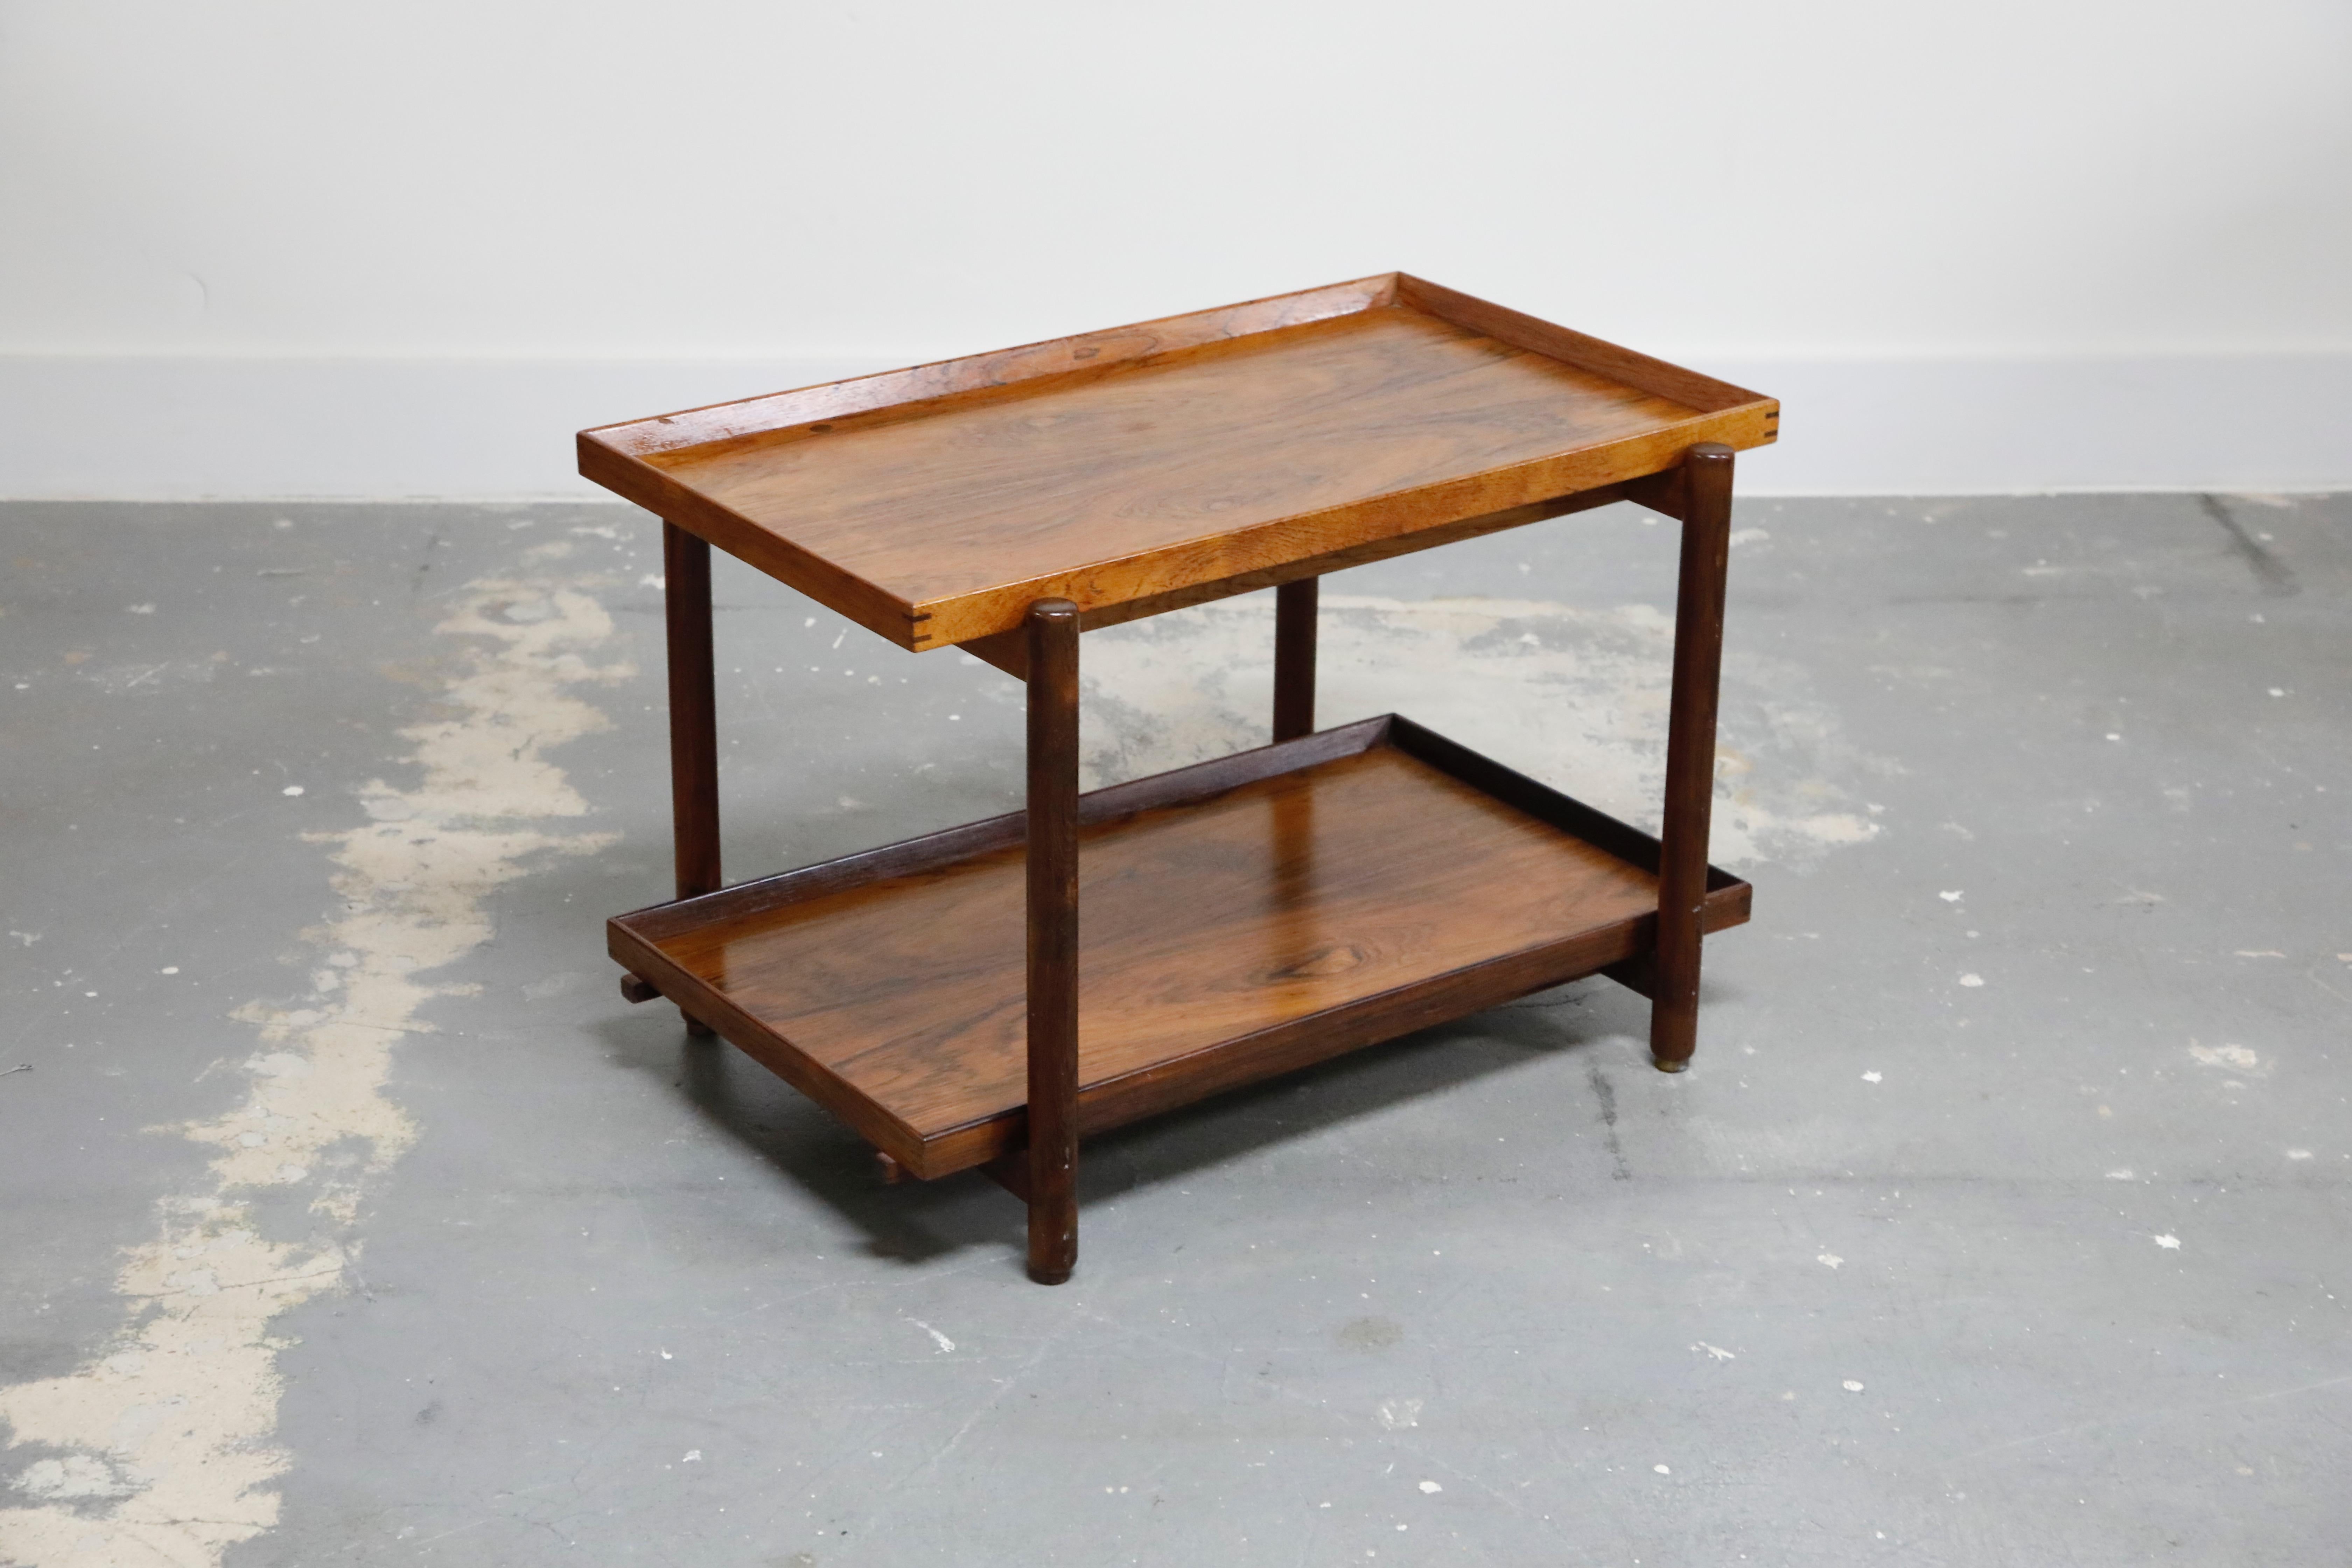 Sleek Danish warm rosewood grained modular bar cart by Poul Hundevad that is perfectly depictive of the Mid-Century Modern era. This adaptable piece has can be reconfigured with the use of both trays on the upper level as shown in the photos